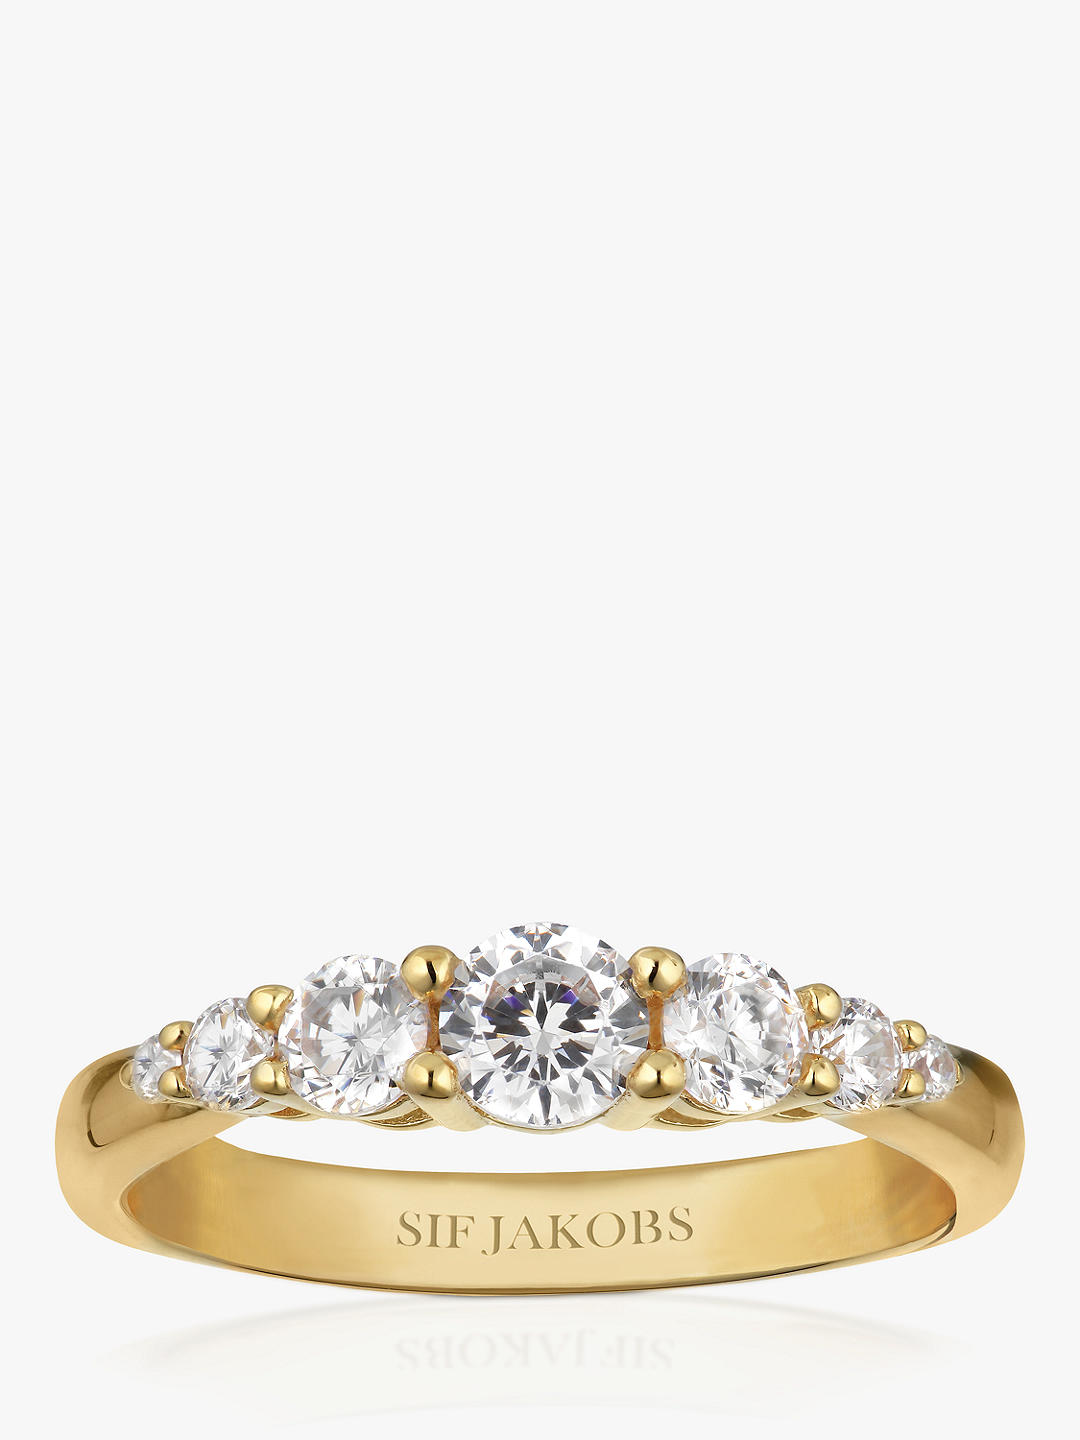 Sif Jakobs Jewellery Graduating Cubic Zirconia Ring, Gold/Clear